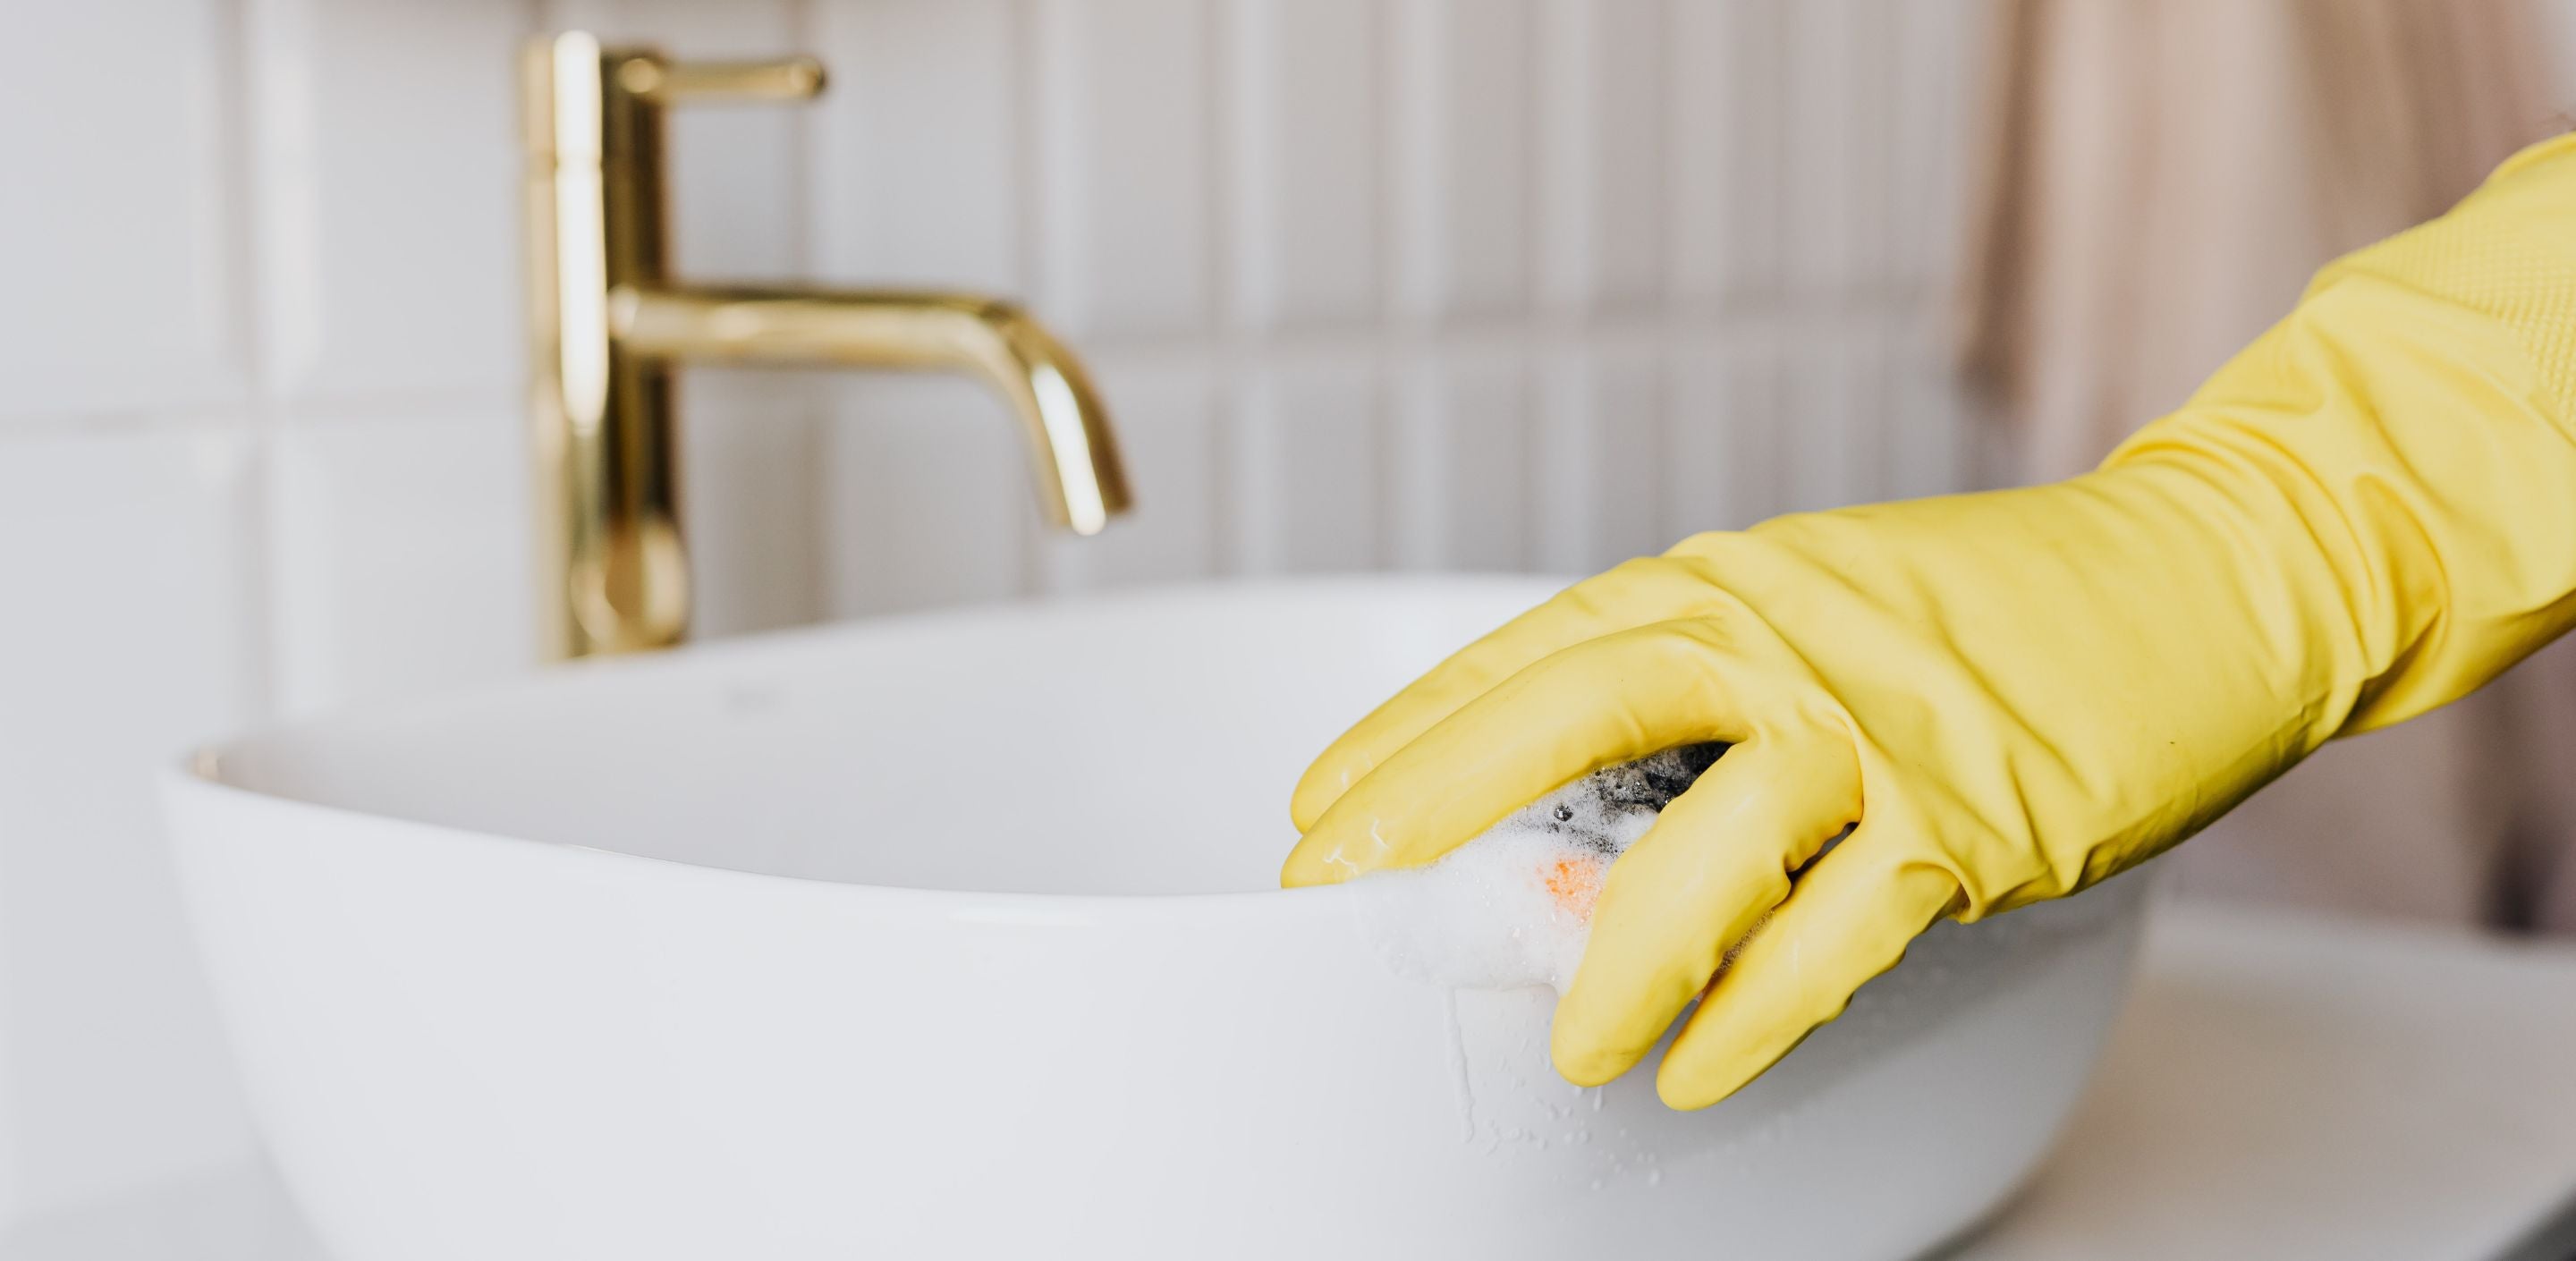 Household Tips: How To Get Rid Of Limescale The Cheap And Natural Way